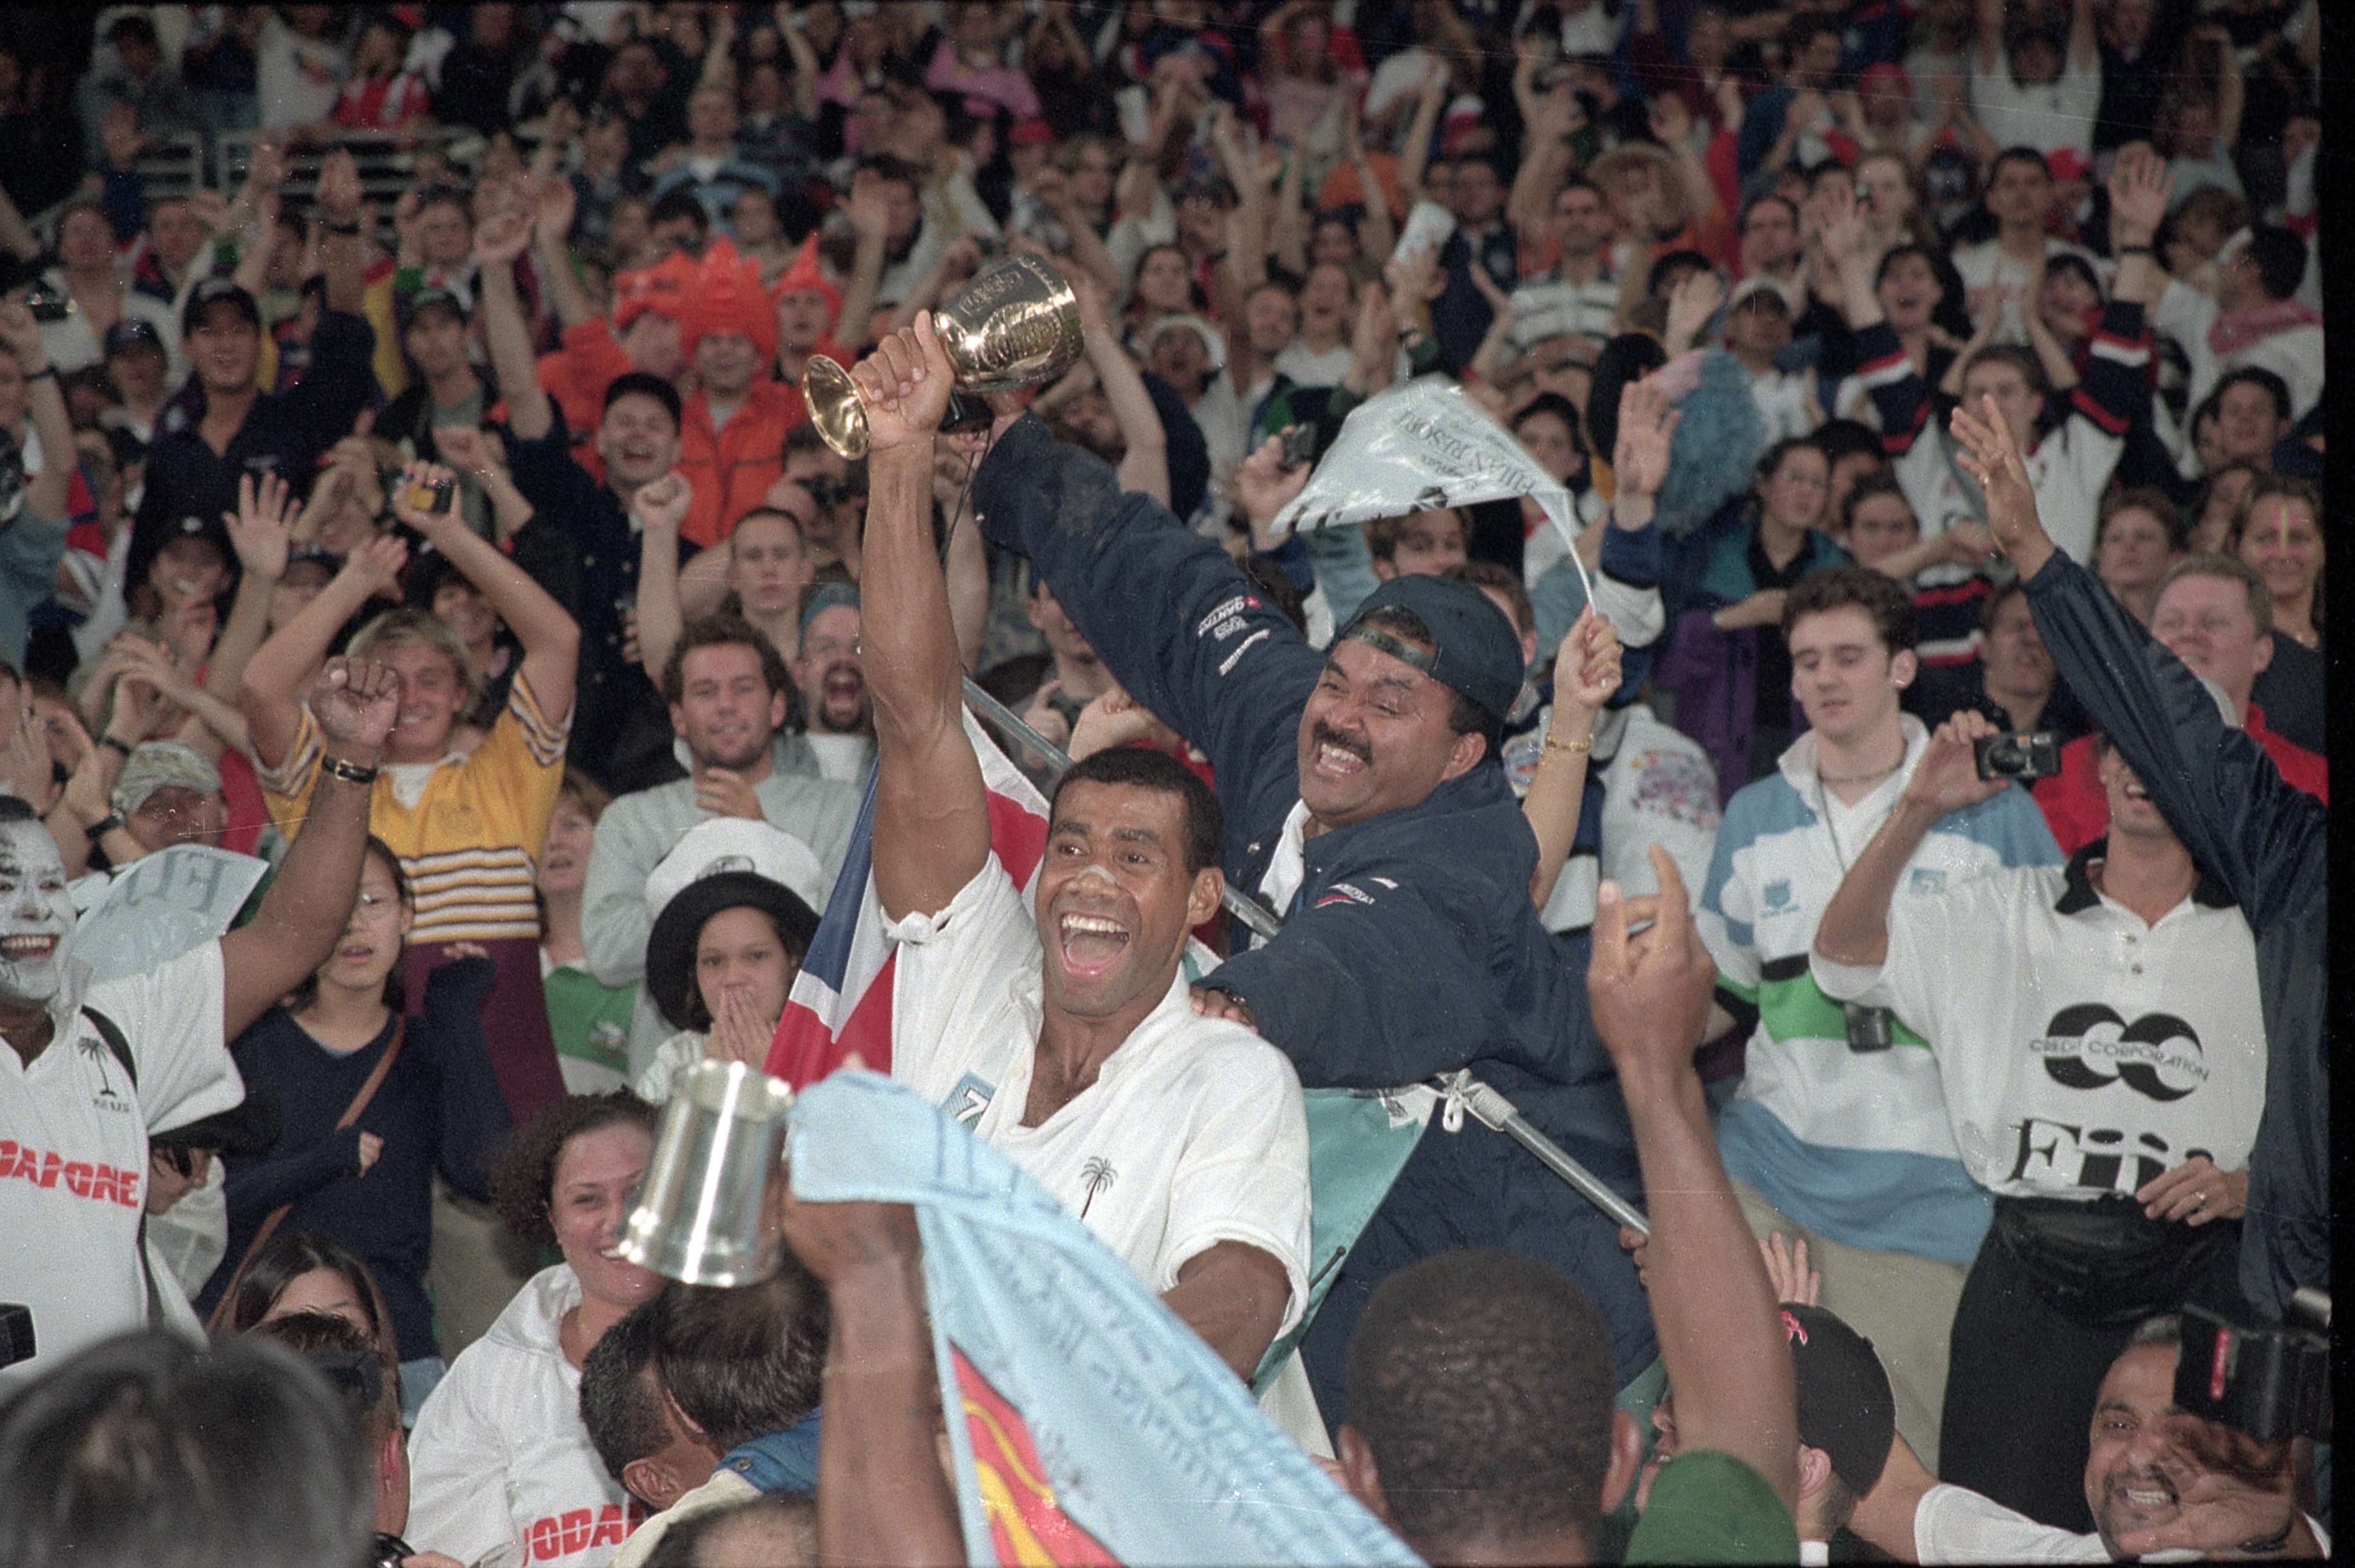 Fiji captain Waisale Serevi, holding the Melrose Cup, celebrates victory in the 1997 Rugby World Cup Sevens final in Hong Kong on March 23, 1997. Photo: Martin Chan